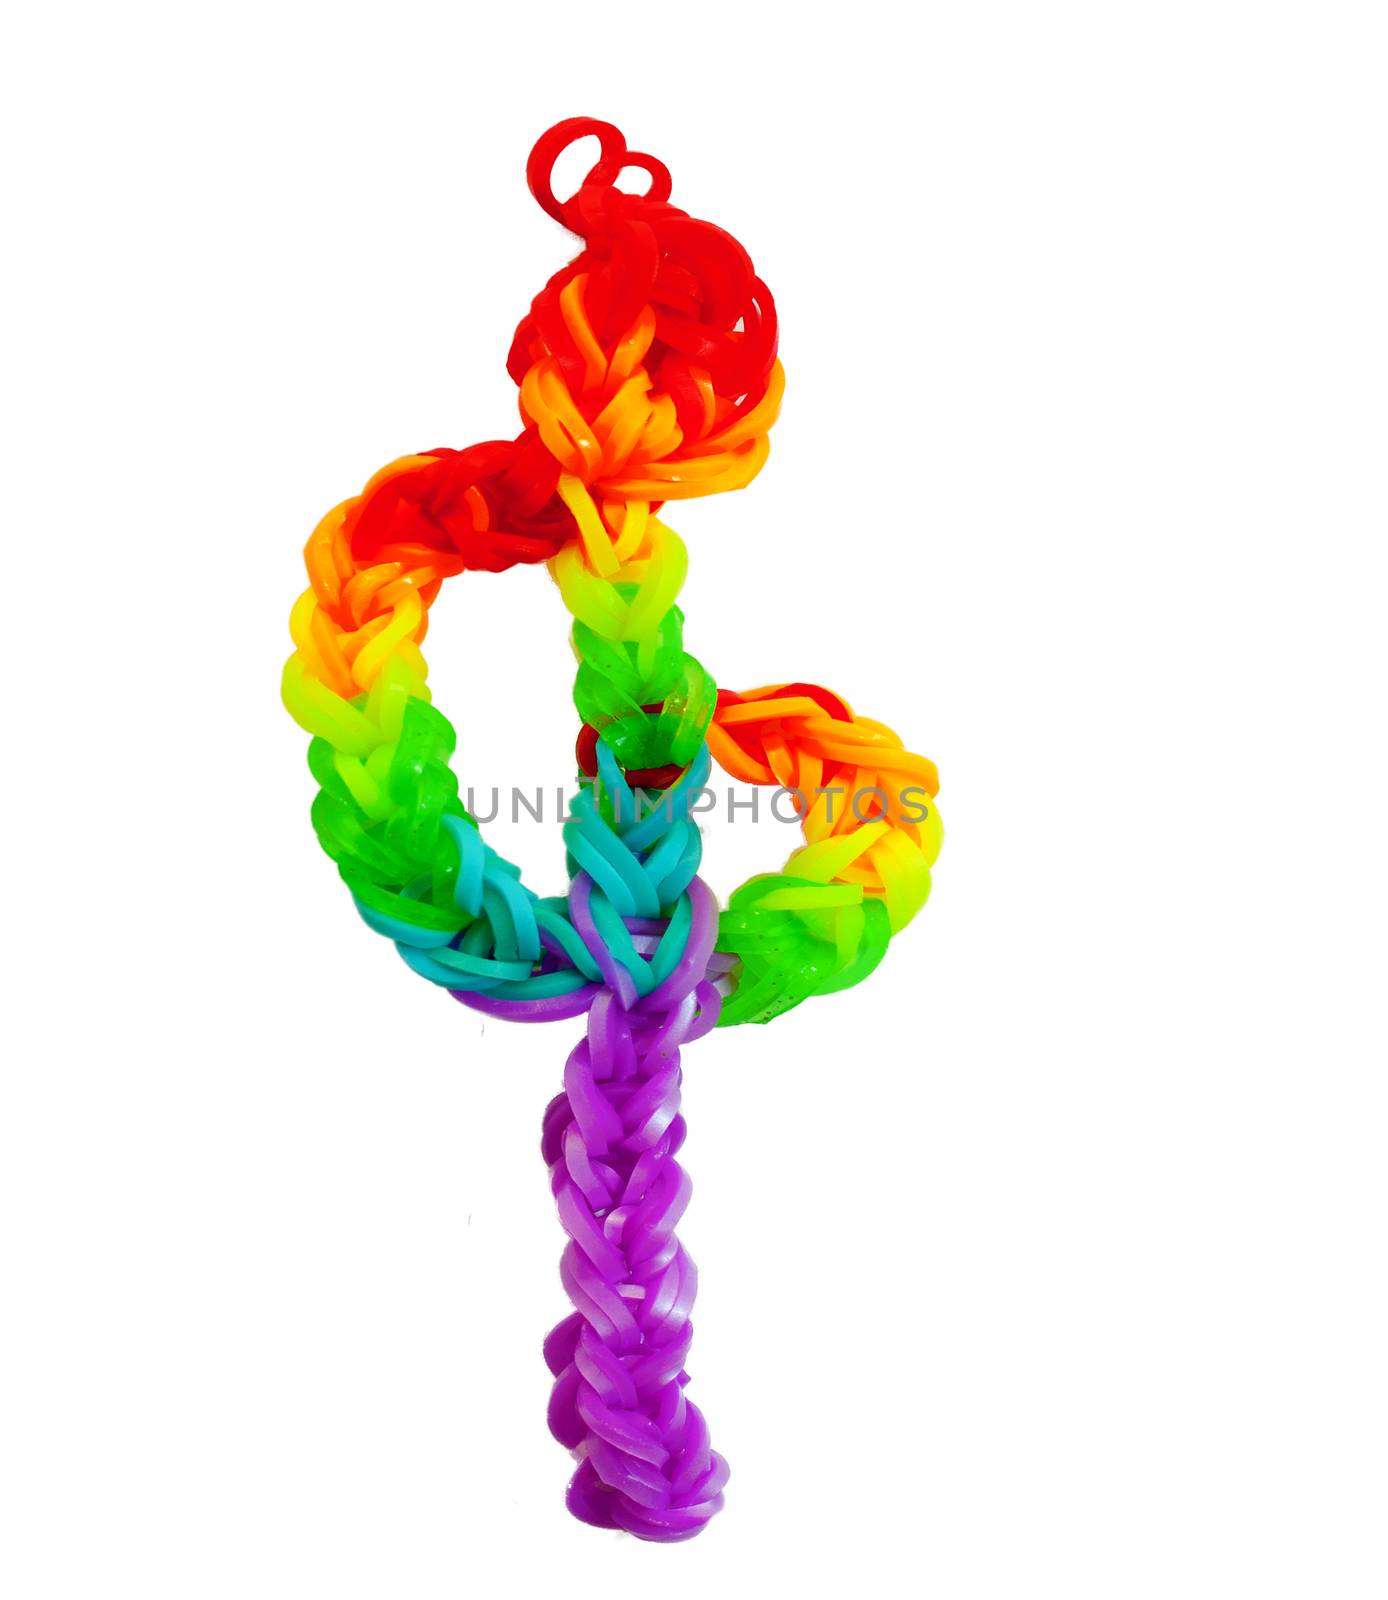 treble clef made of colorful rainbow loom rubber bands. by Havana